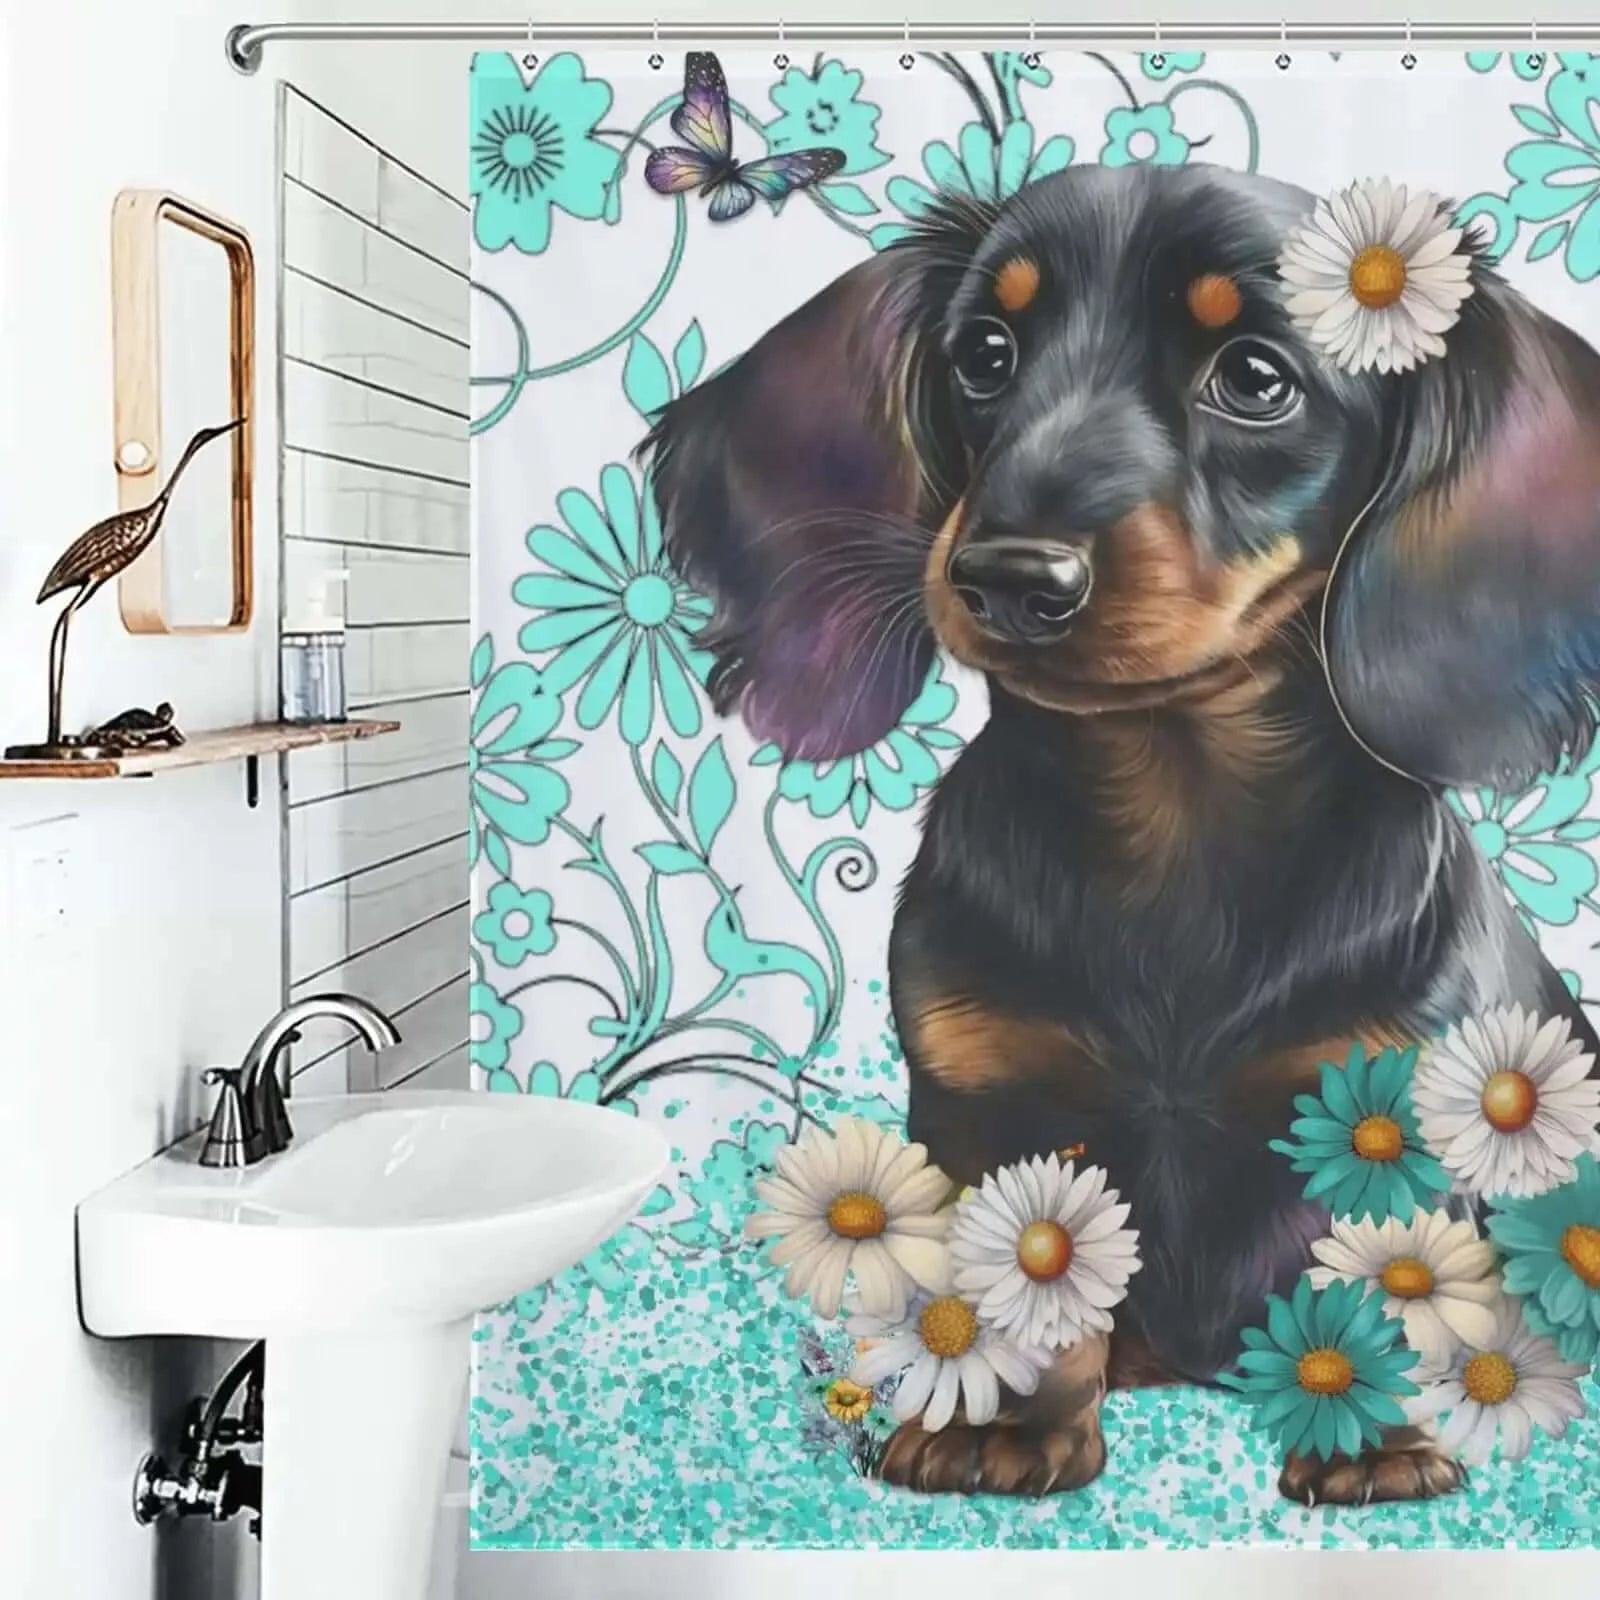 Cute Daschund Floral shower curtain with daisies for bathroom decor by Cotton Cat.